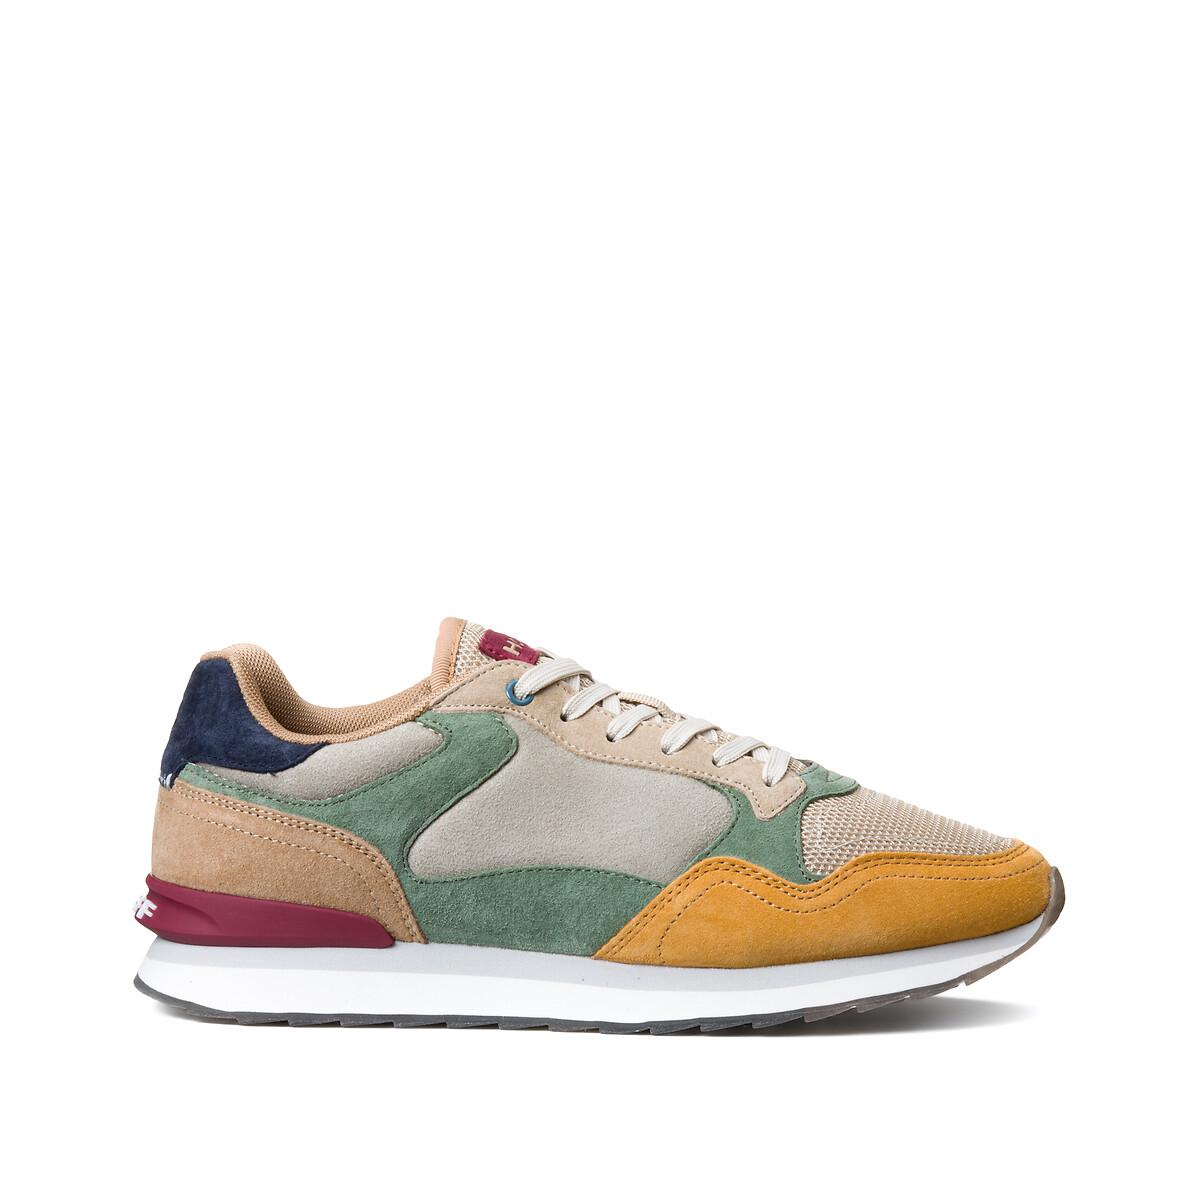 City Viena Man Trainers in Suede